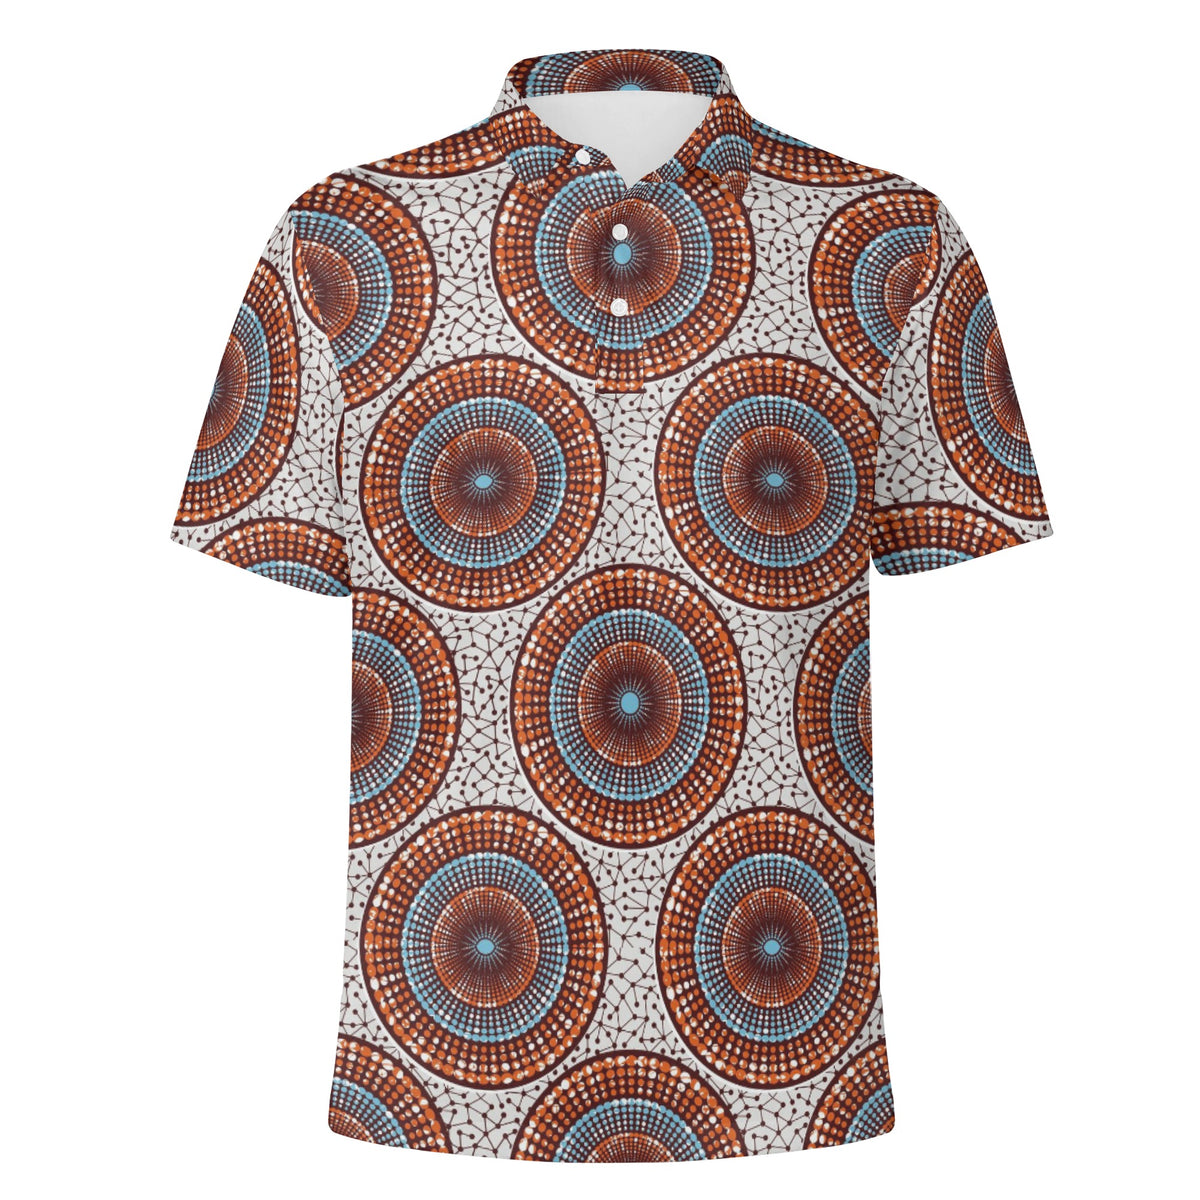 Dark Olive Green Polo Shirt with African Ankara prints in vibrant colors Sumbu_African_Prints_and_Designs